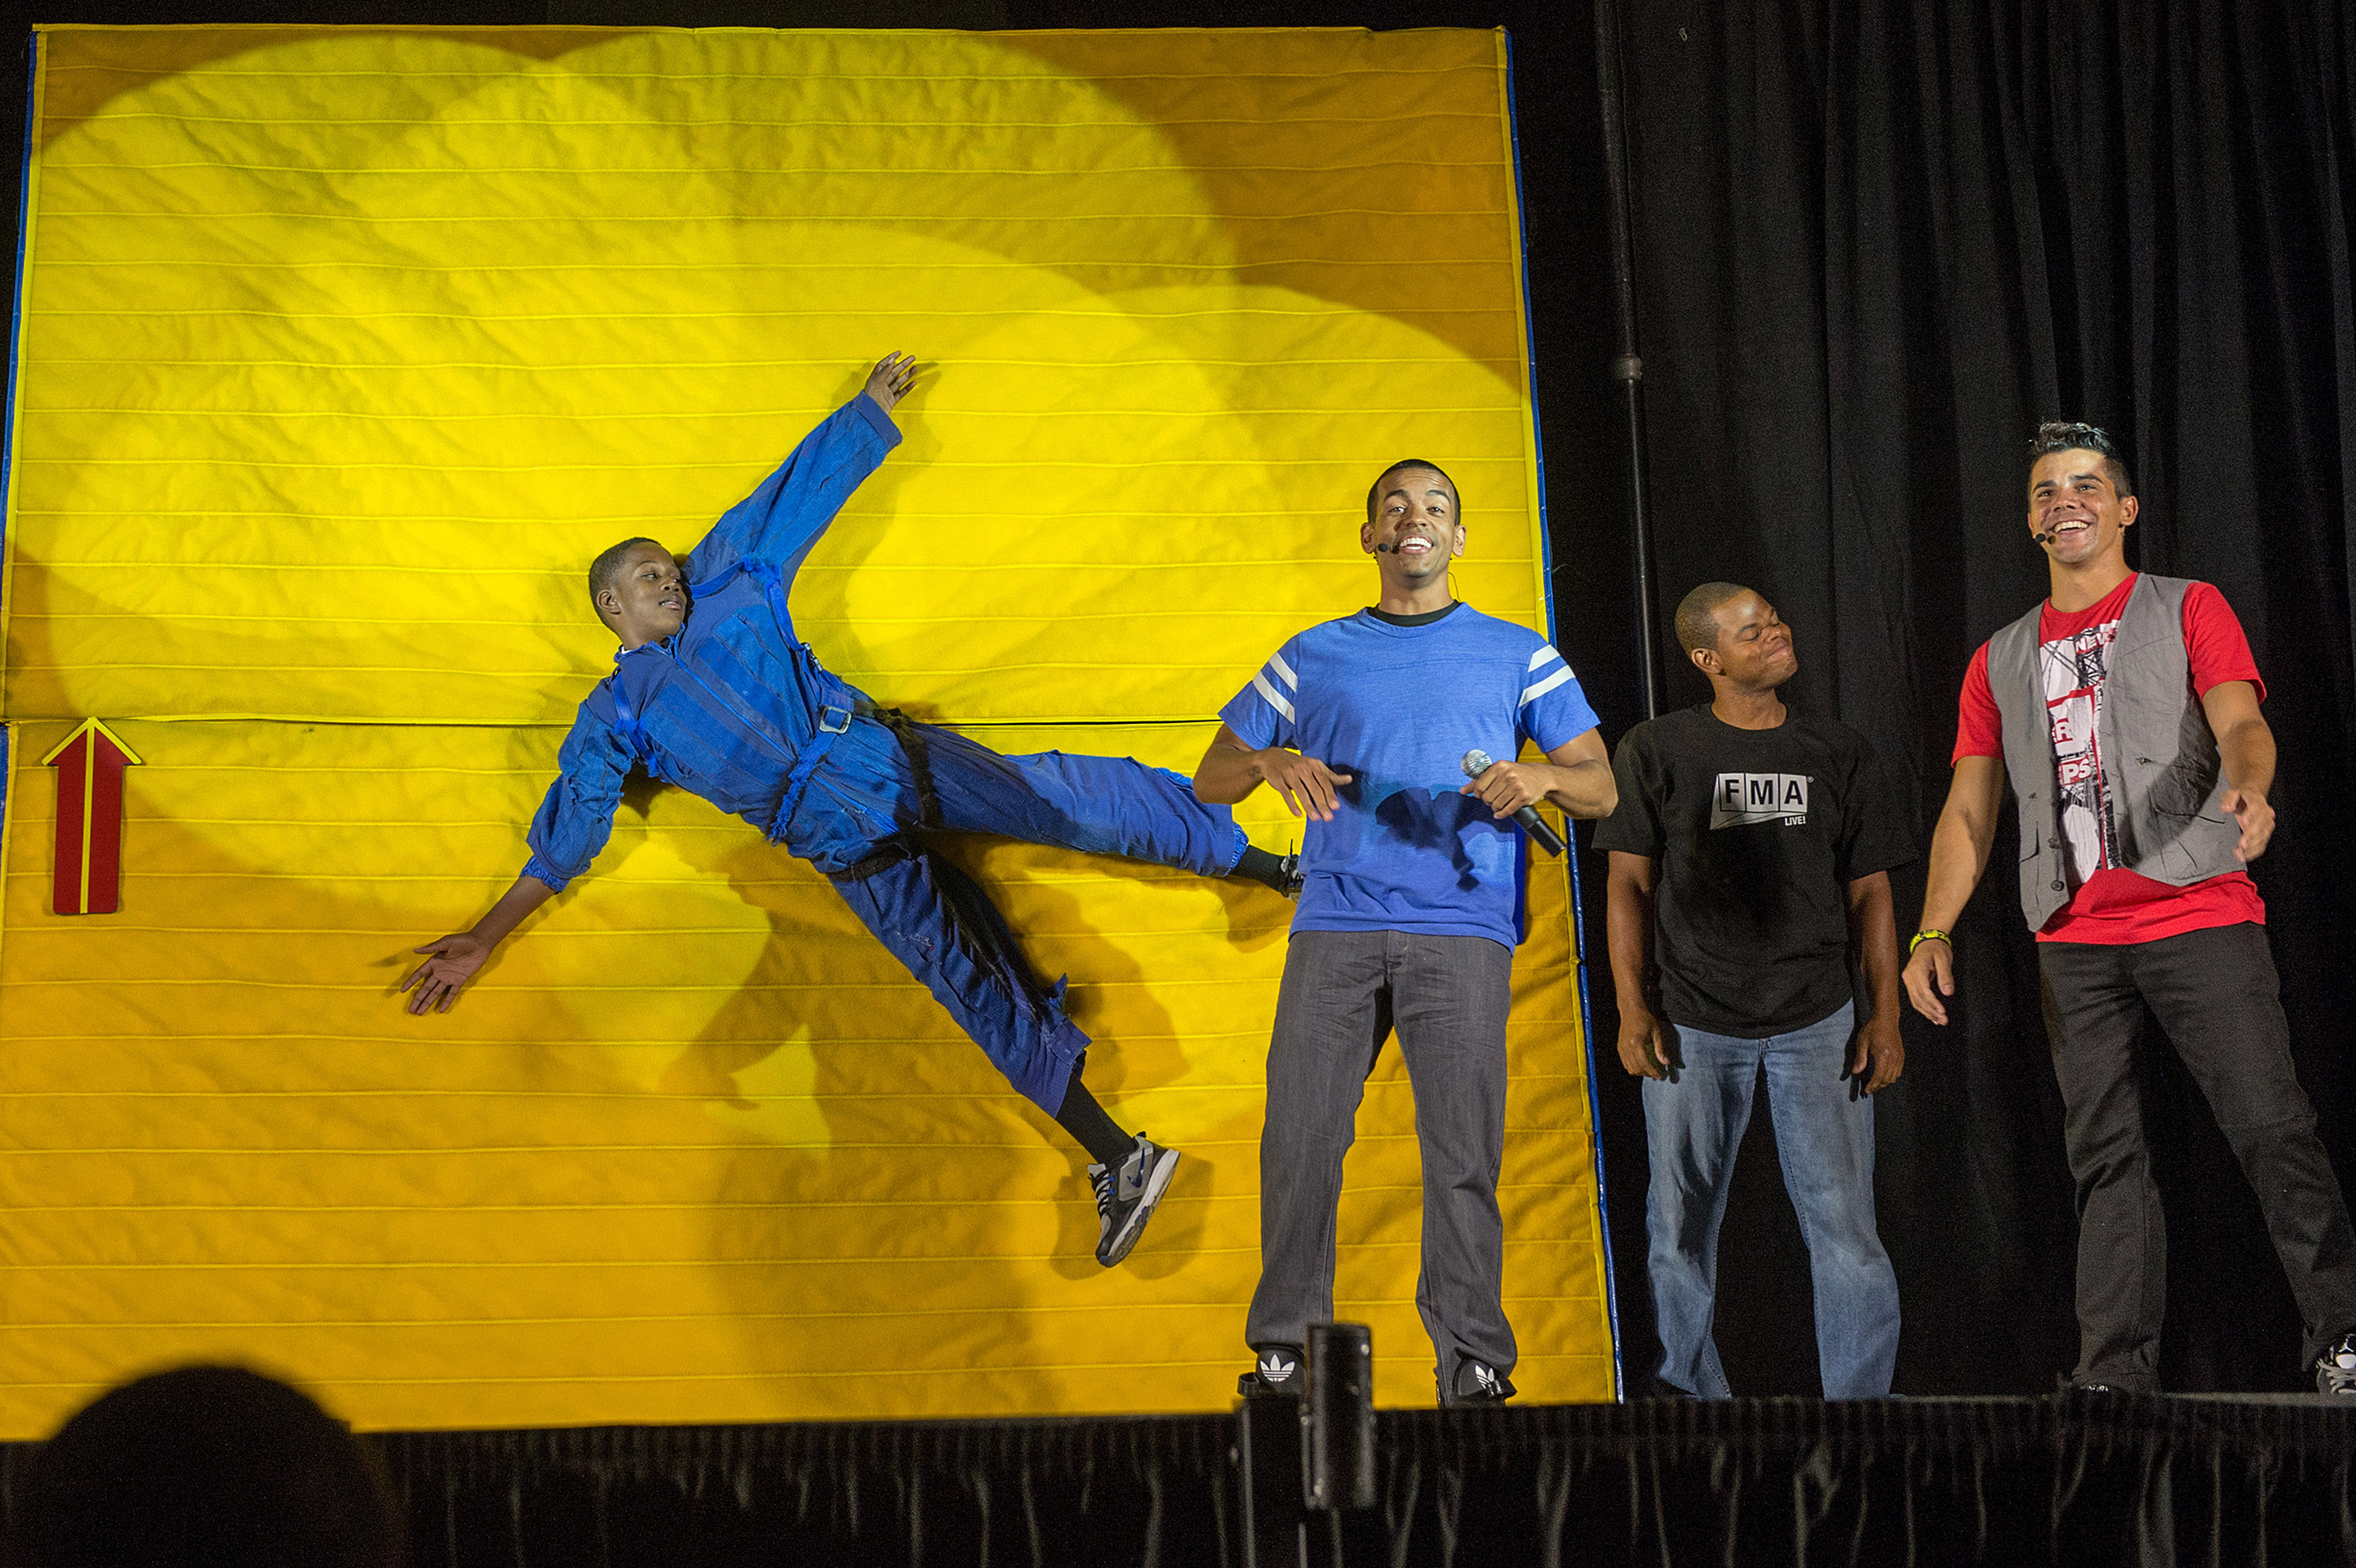 With the help of a student participant, “FMA Live!” crew members explain Newton’s first law of motion at Hardy Middle School in Washington on Sept. 16th, 2013. “FMA Live!” travels across the country and has reached nearly 300,000 students. Image: NASA/Jay Westcott